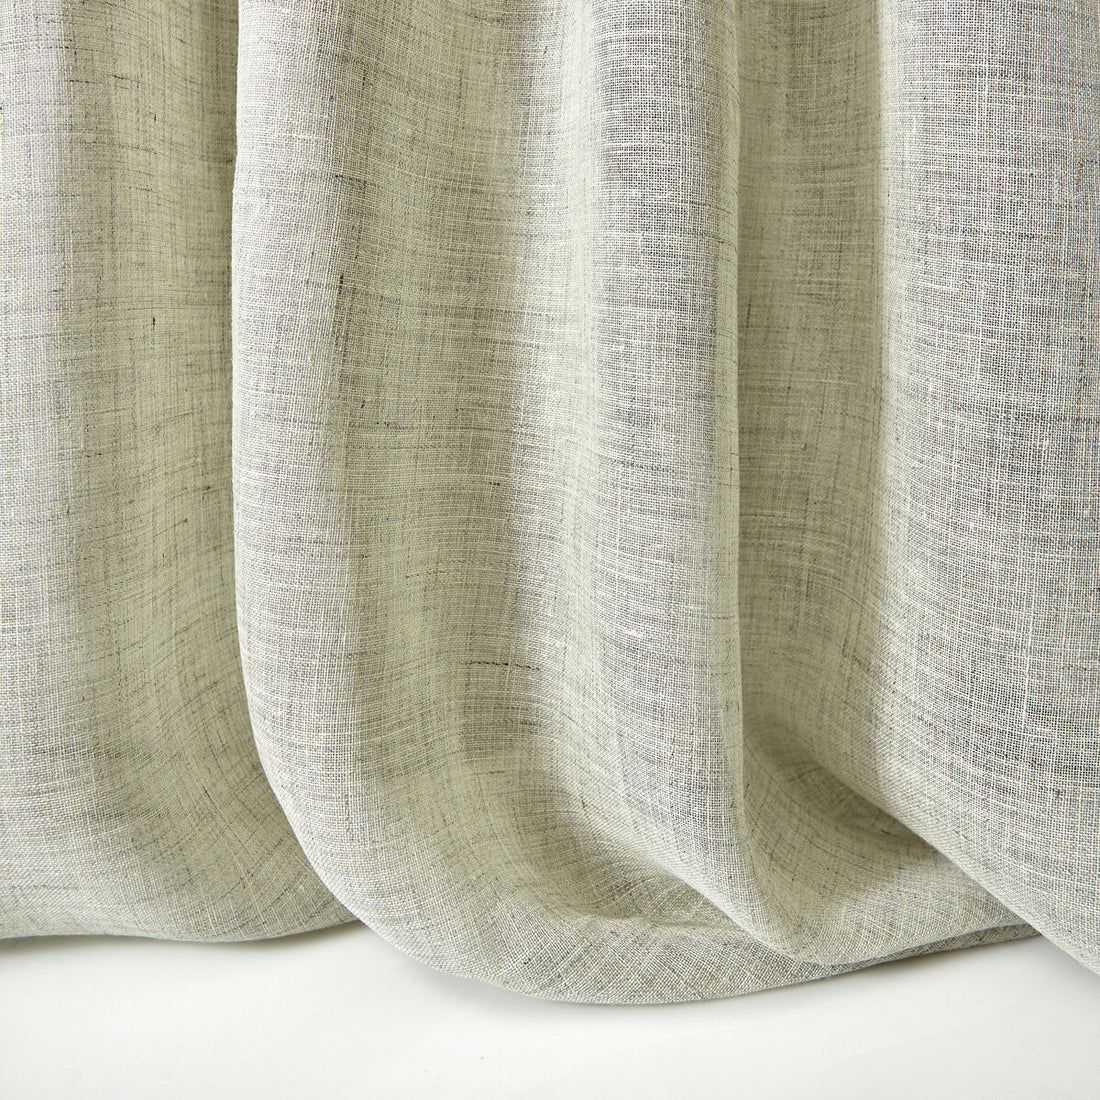 Menes fabric in 7 color - pattern LZ-30198.07.0 - by Kravet Design in the Lizzo collection